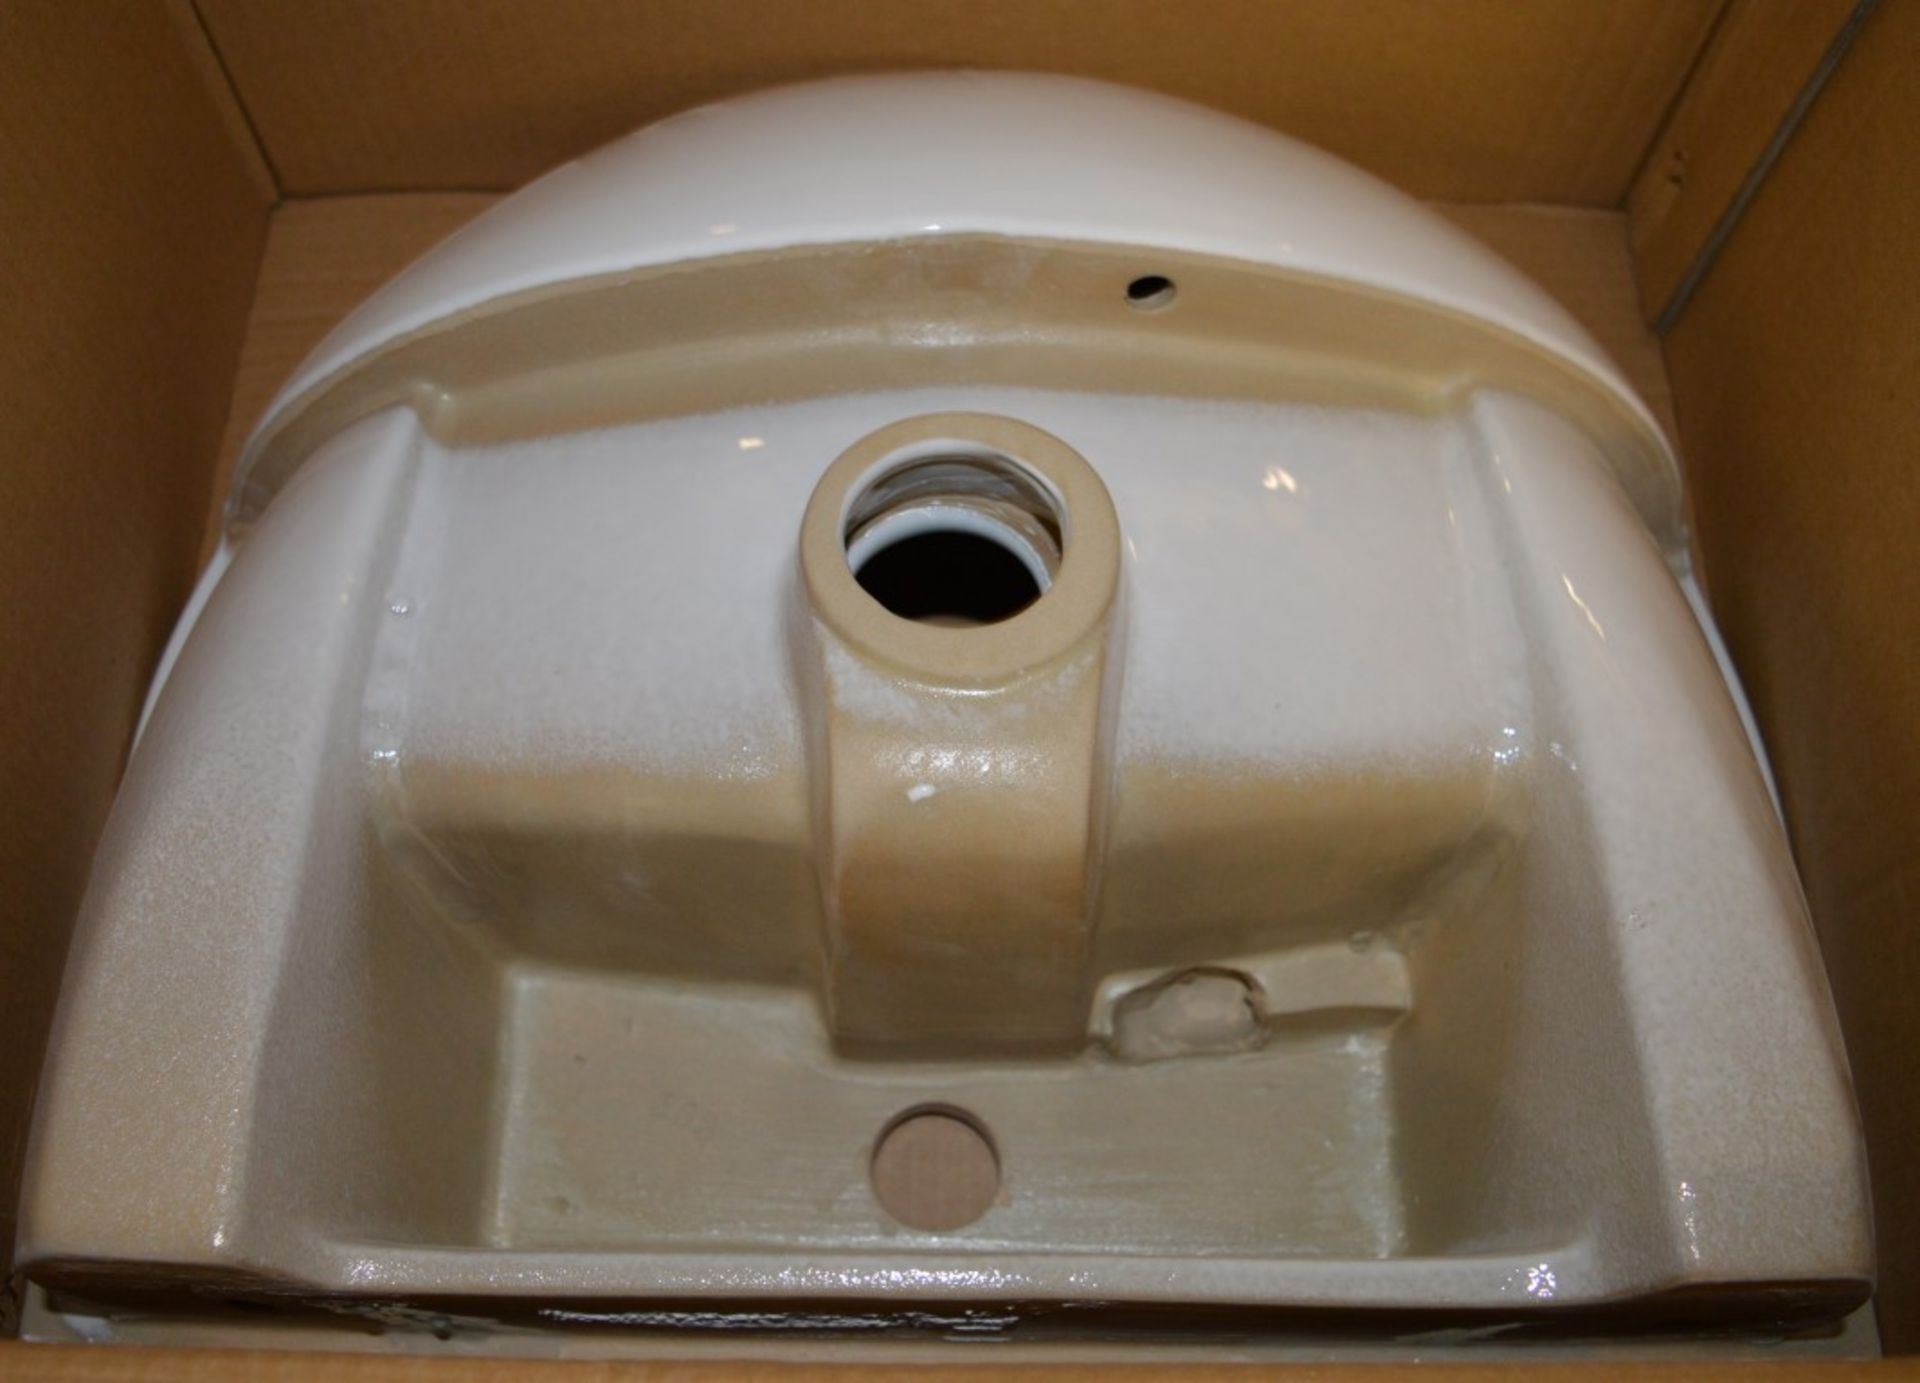 10 x Vogue Zoe Semi Reccessed 1th 520mm Sink Basins - Vogue Bathrooms - Brand New and Boxed - Ref - Image 4 of 4